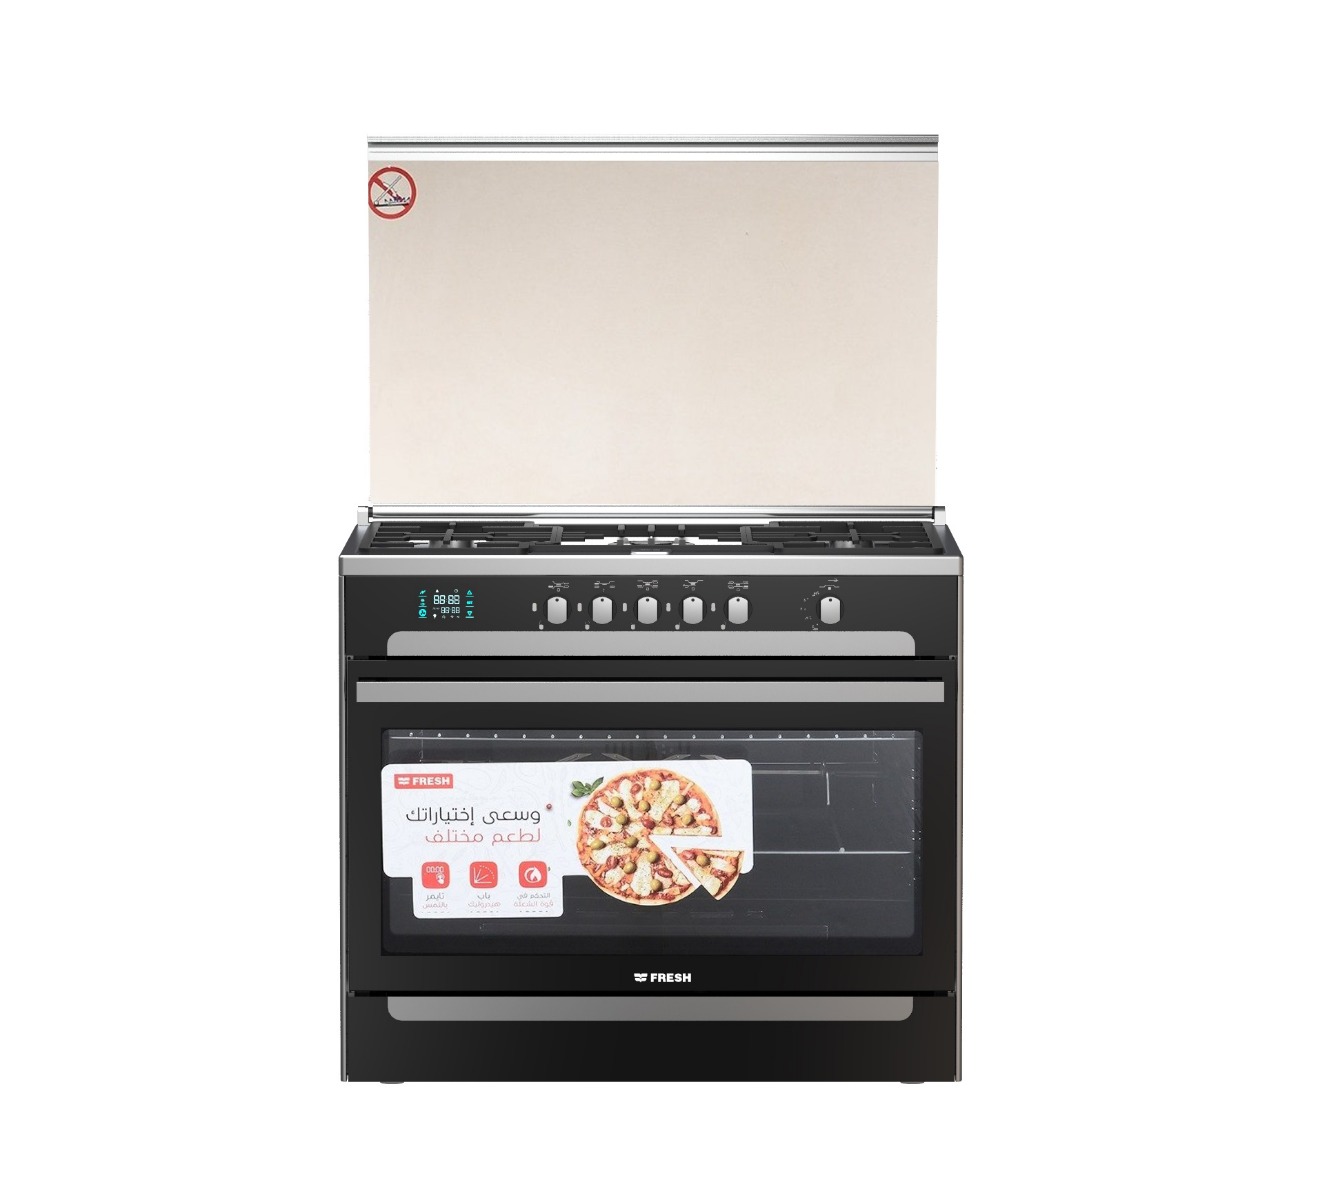 Fresh Gas Cooker, 5 Burners, Silver - 13915